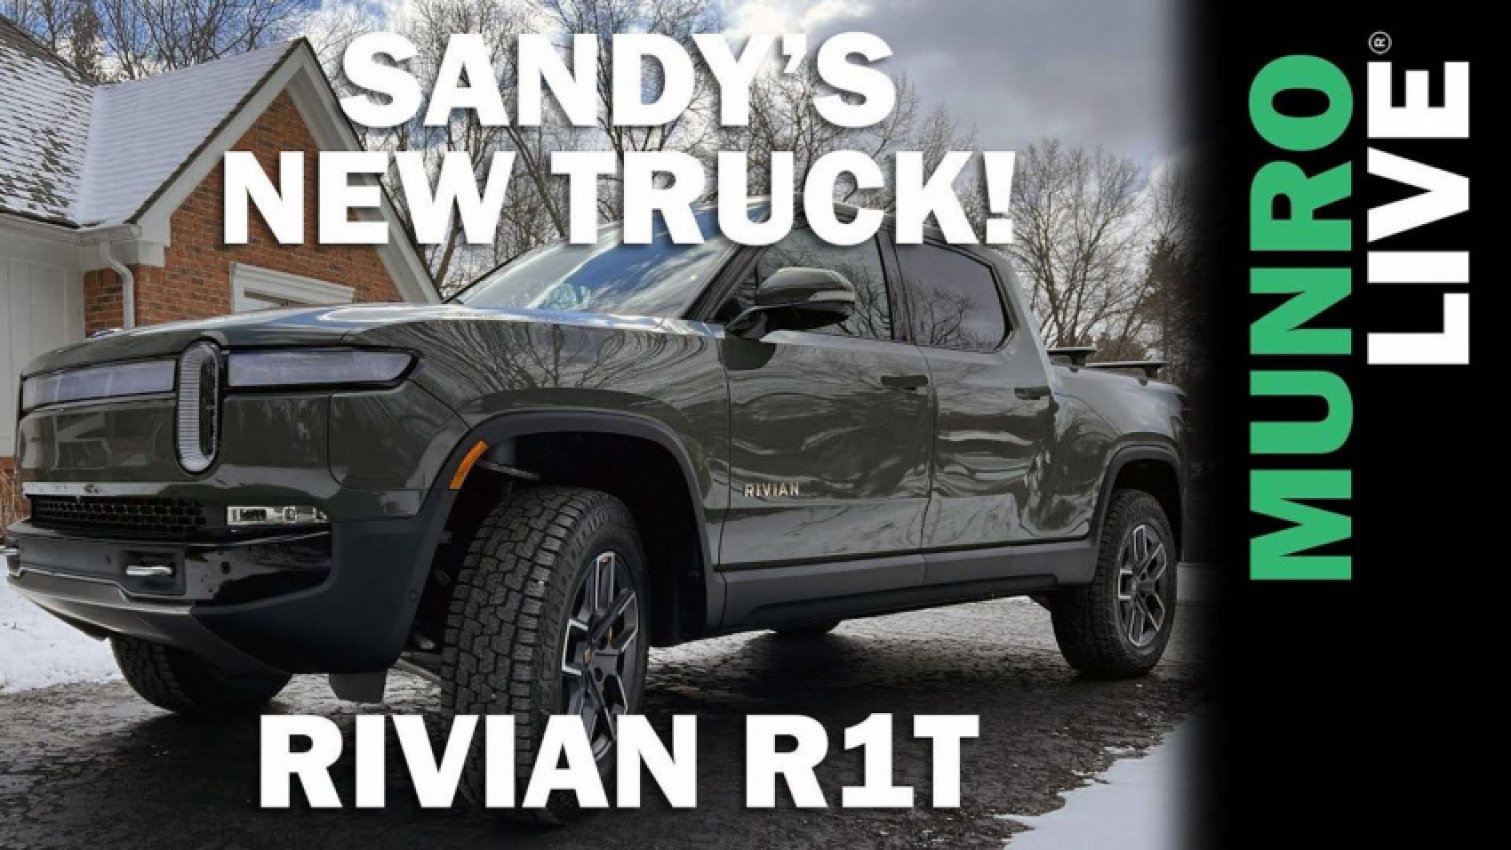 autos, cars, evs, jeep, rivian, vnex, wrangler, sandy munro is proud owner of a rivian r1t: he sold his wrangler 4xe